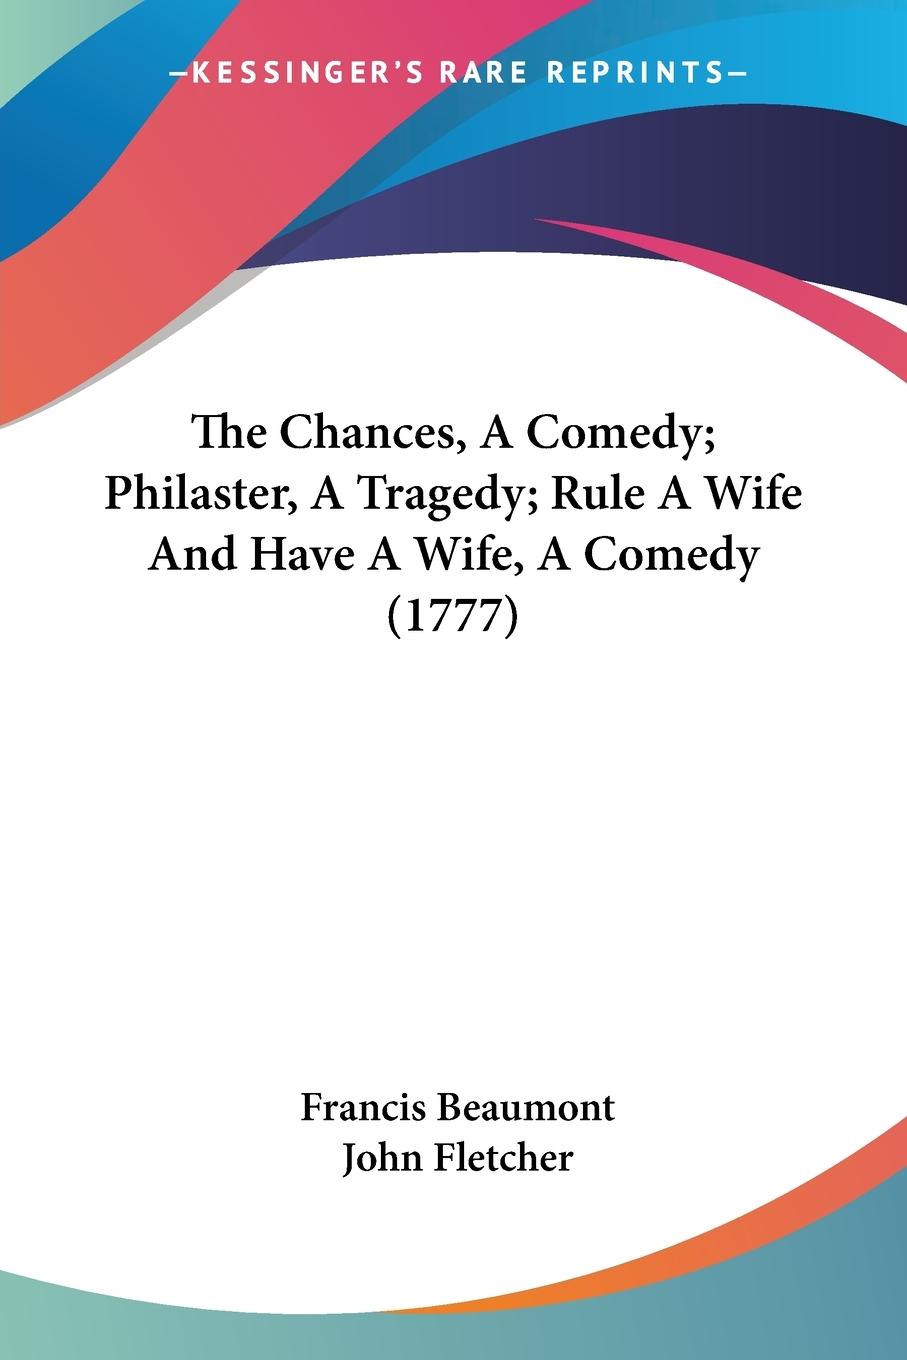 The Chances, A Comedy; Philaster, A Tragedy; Rule A Wife And Have A Wife, A Comedy (1777) - Beaumont, Francis Fletcher, John